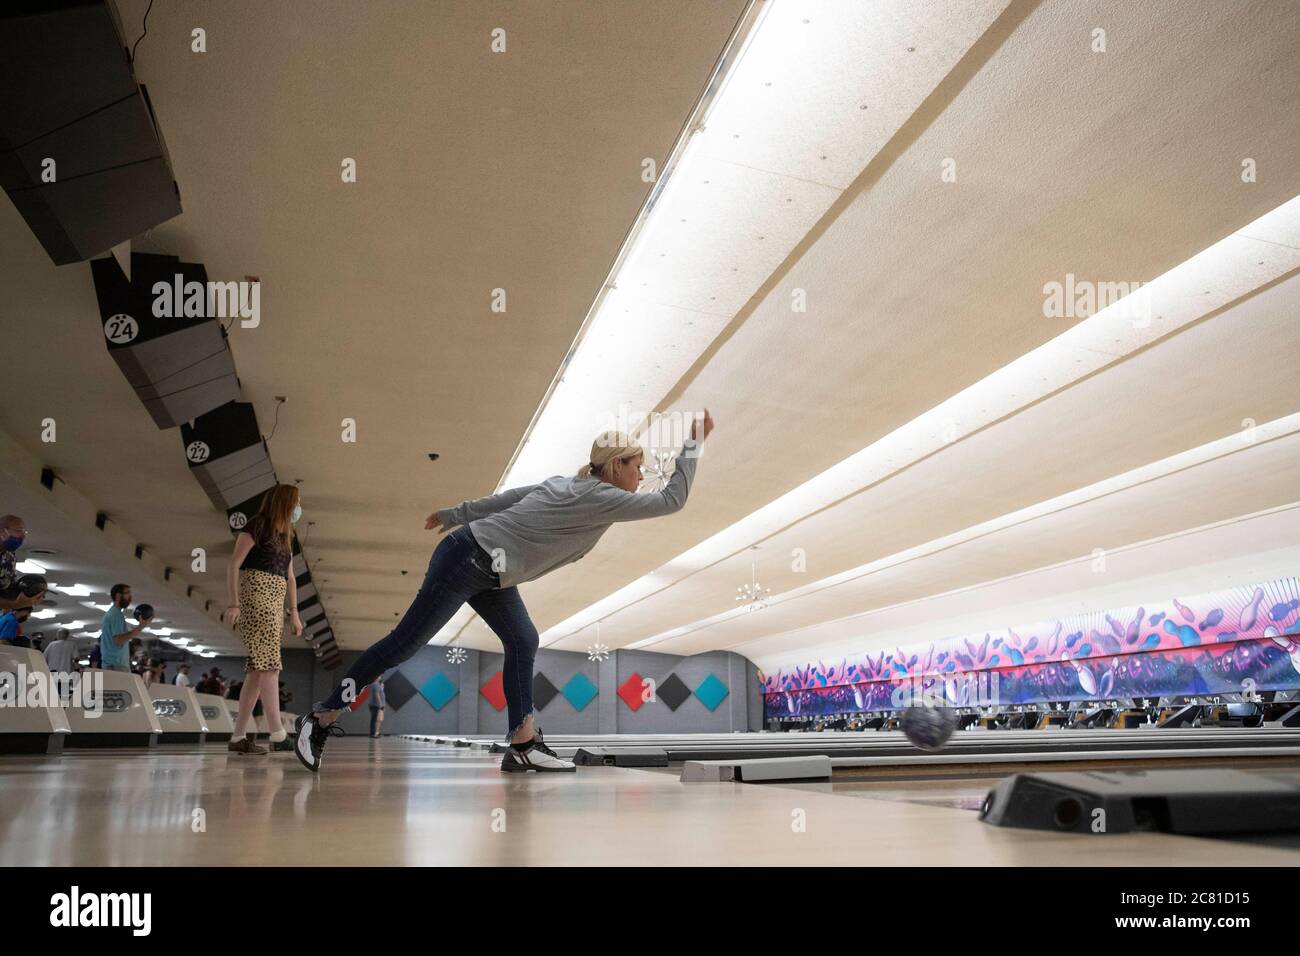 Austin, TX USA July 17, 2020: Patrons enjoy the last bowling night at Dart Bowl as the 64-year-old business in central Austin closes due to economic struggles and the COVID-19 pandemic. Credit: Bob Daemmrich/Alamy Live News Stock Photo